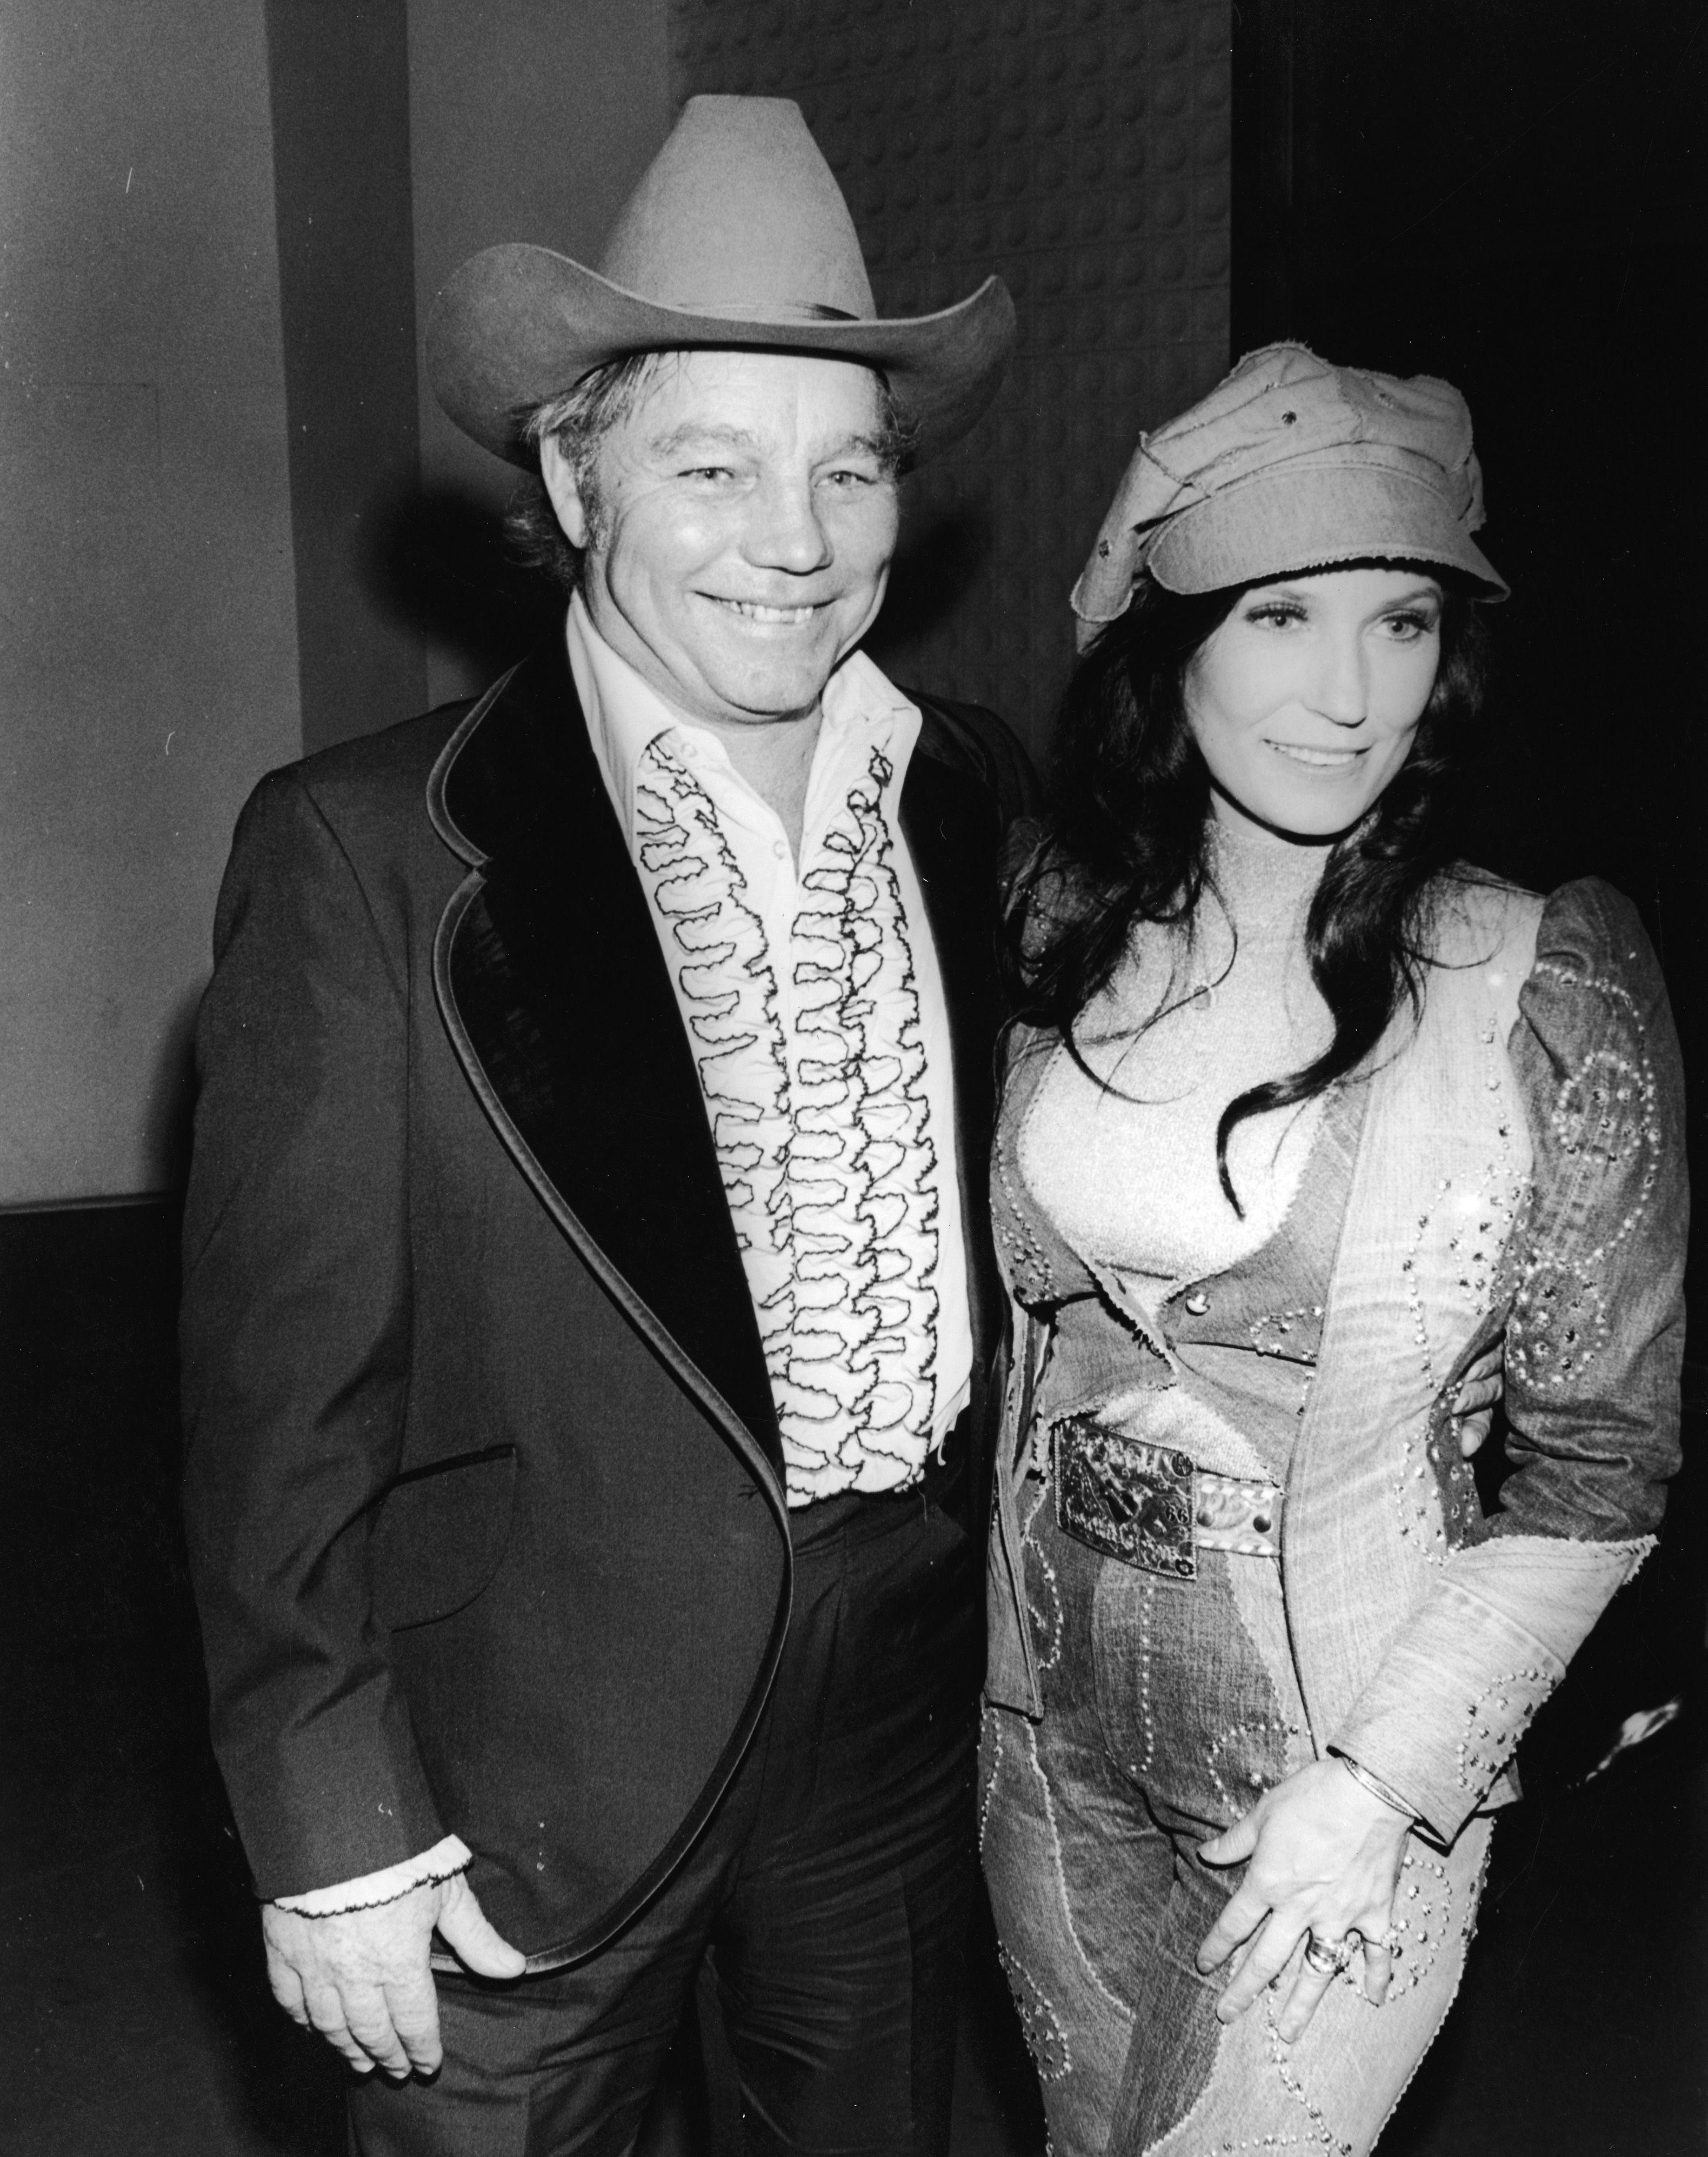 Loretta Lynn and her husband Oliver Lynn, Jr. (also known as Mooney) (1948 - 1996) at the Country & Western Music Awards, Hollywood, California, February 27, 1975. | Source: Getty Images